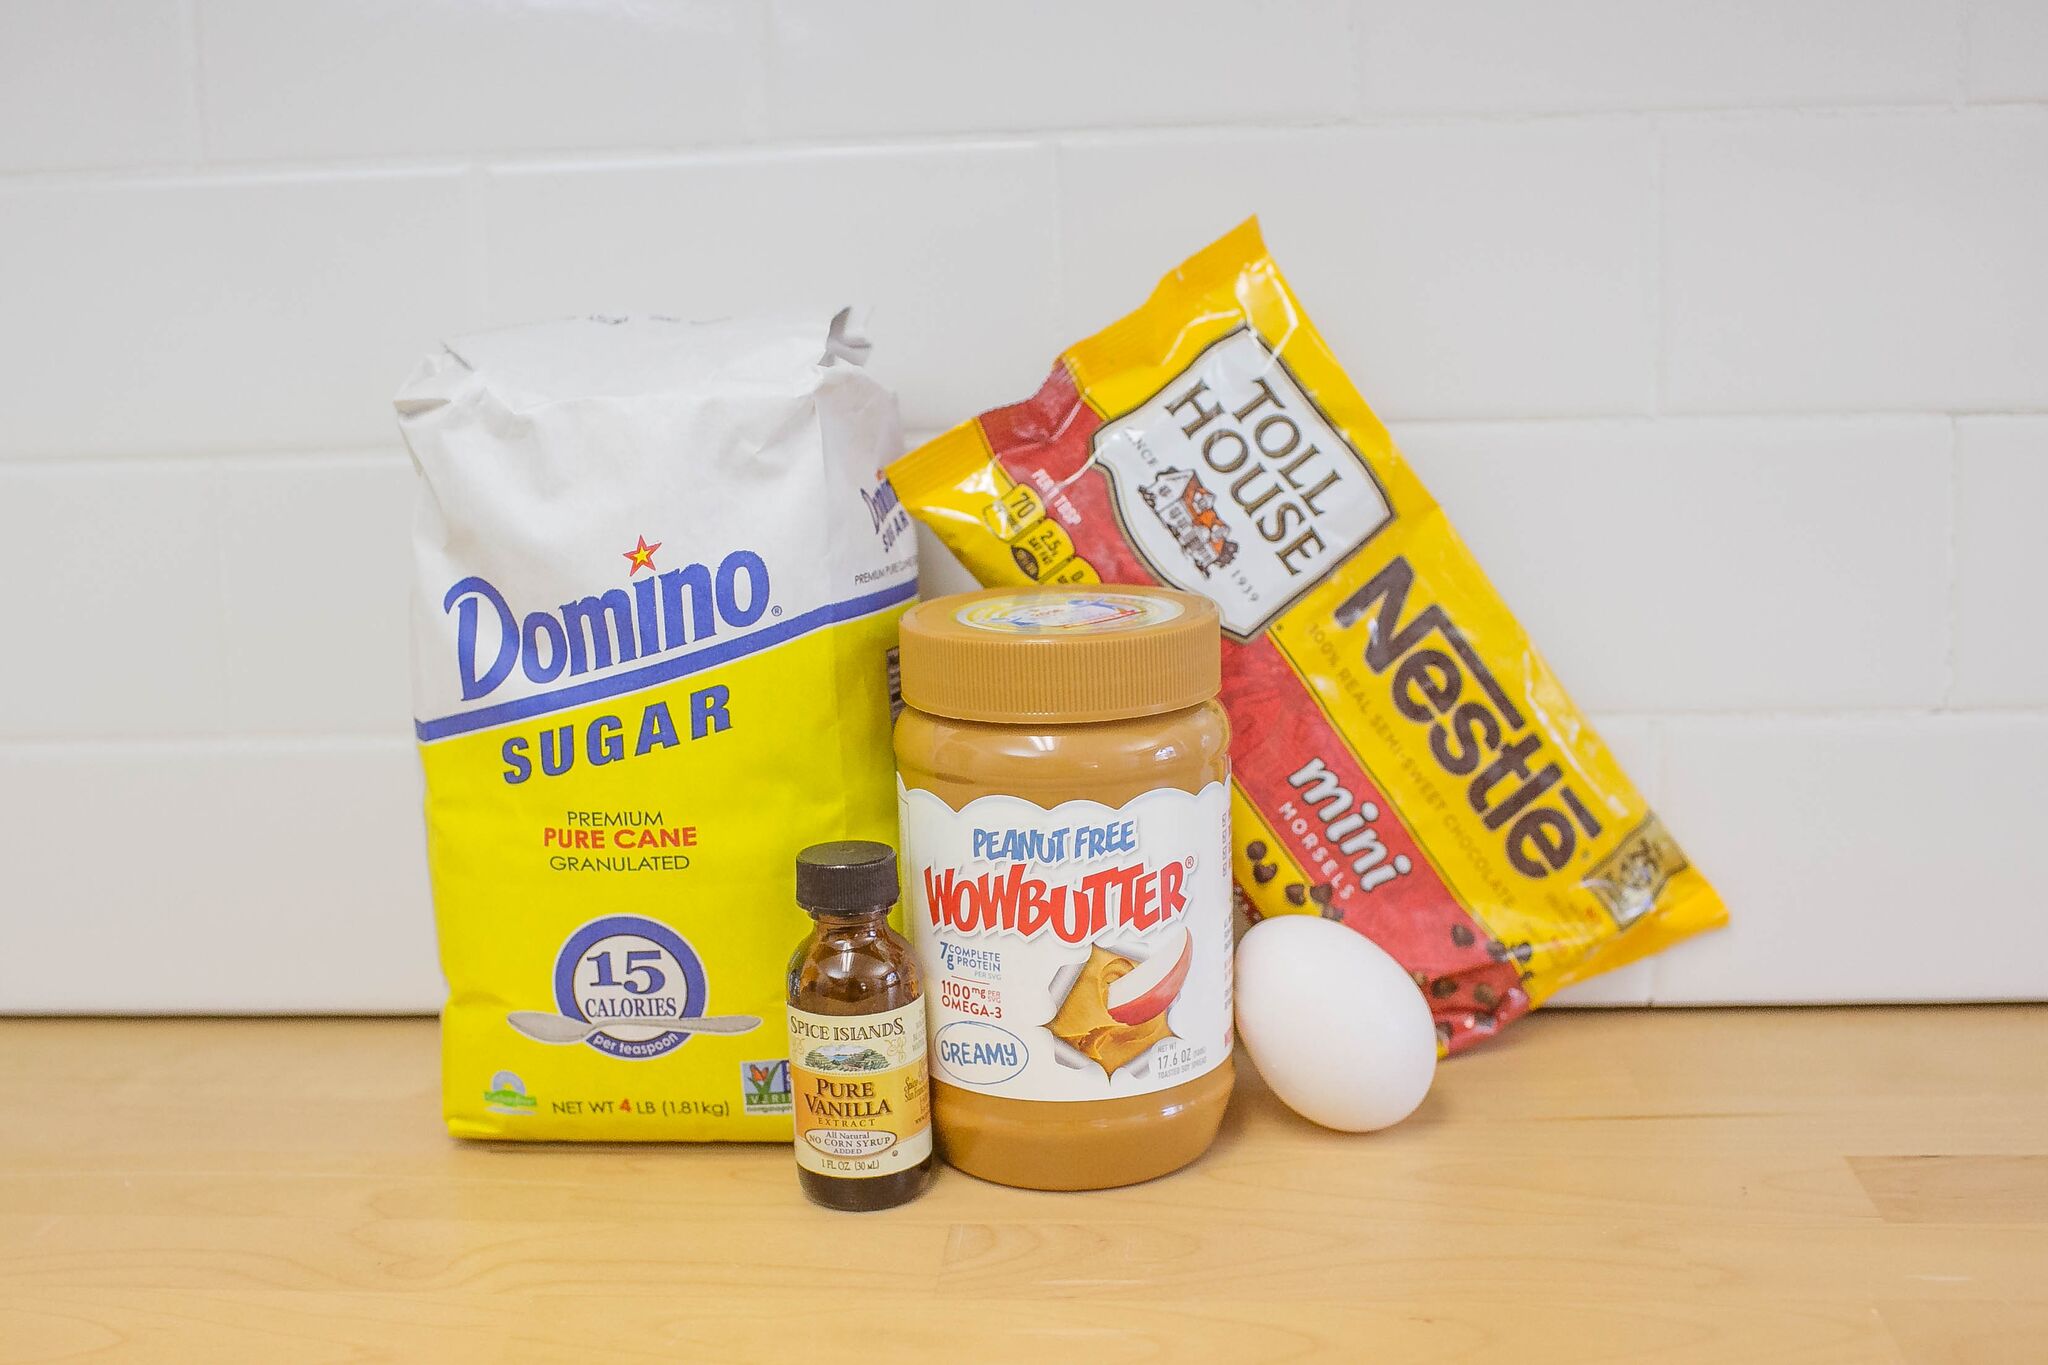 Assemble your ingredients for the un-peanut butter bookies: peanut free Wowbutter, vanilla, sugar, one egg and mini chocolate morsels. 